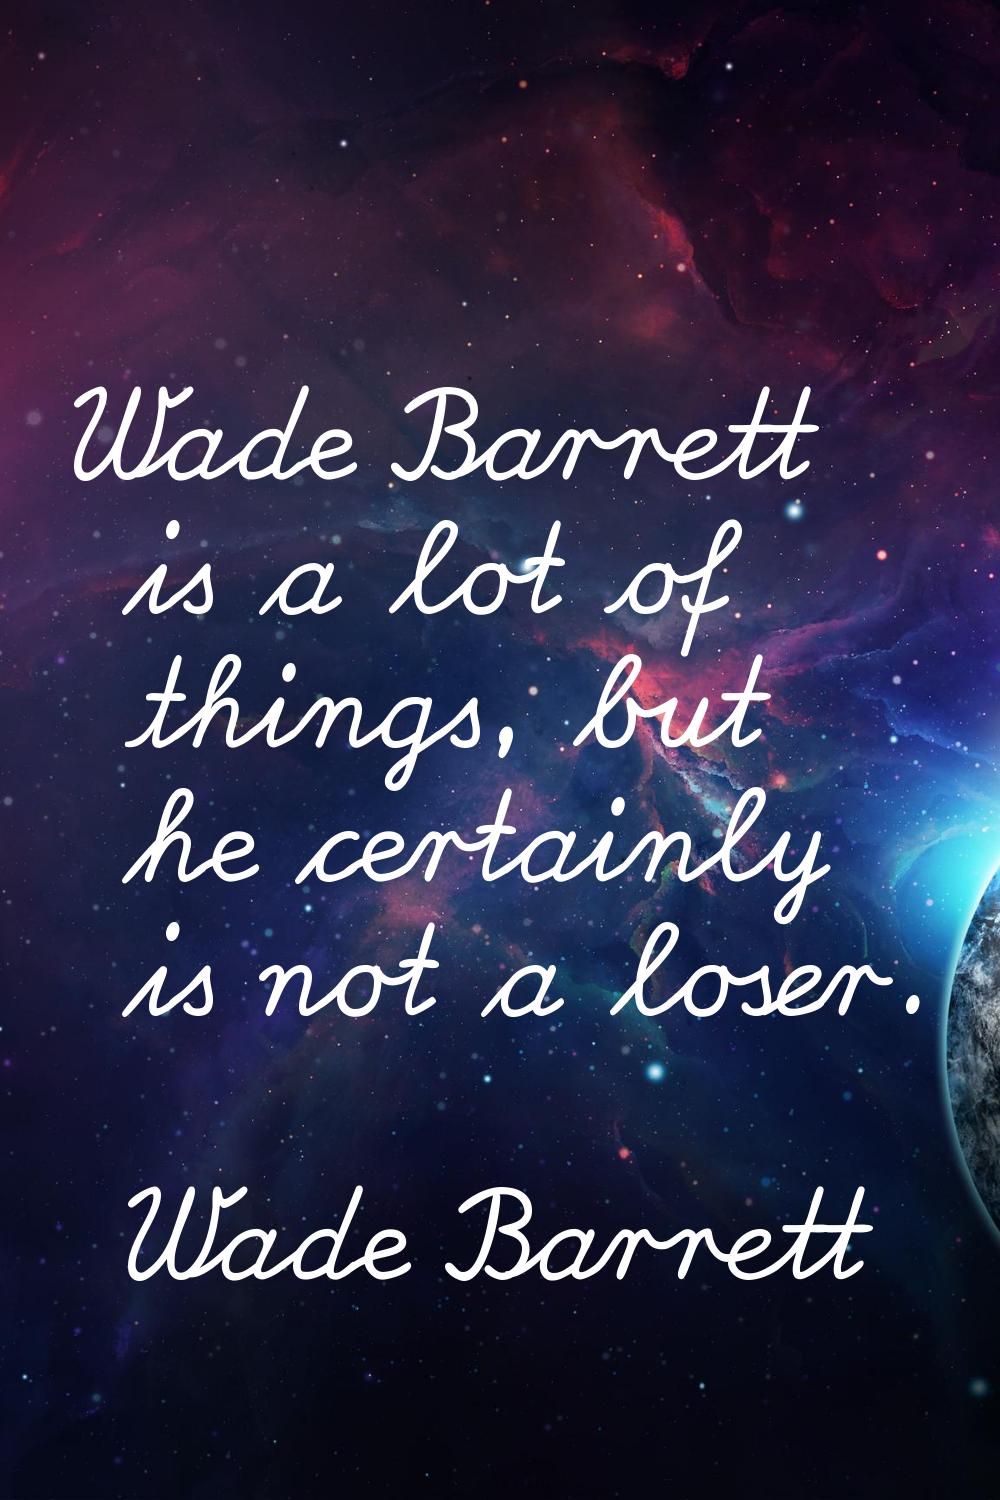 Wade Barrett is a lot of things, but he certainly is not a loser.